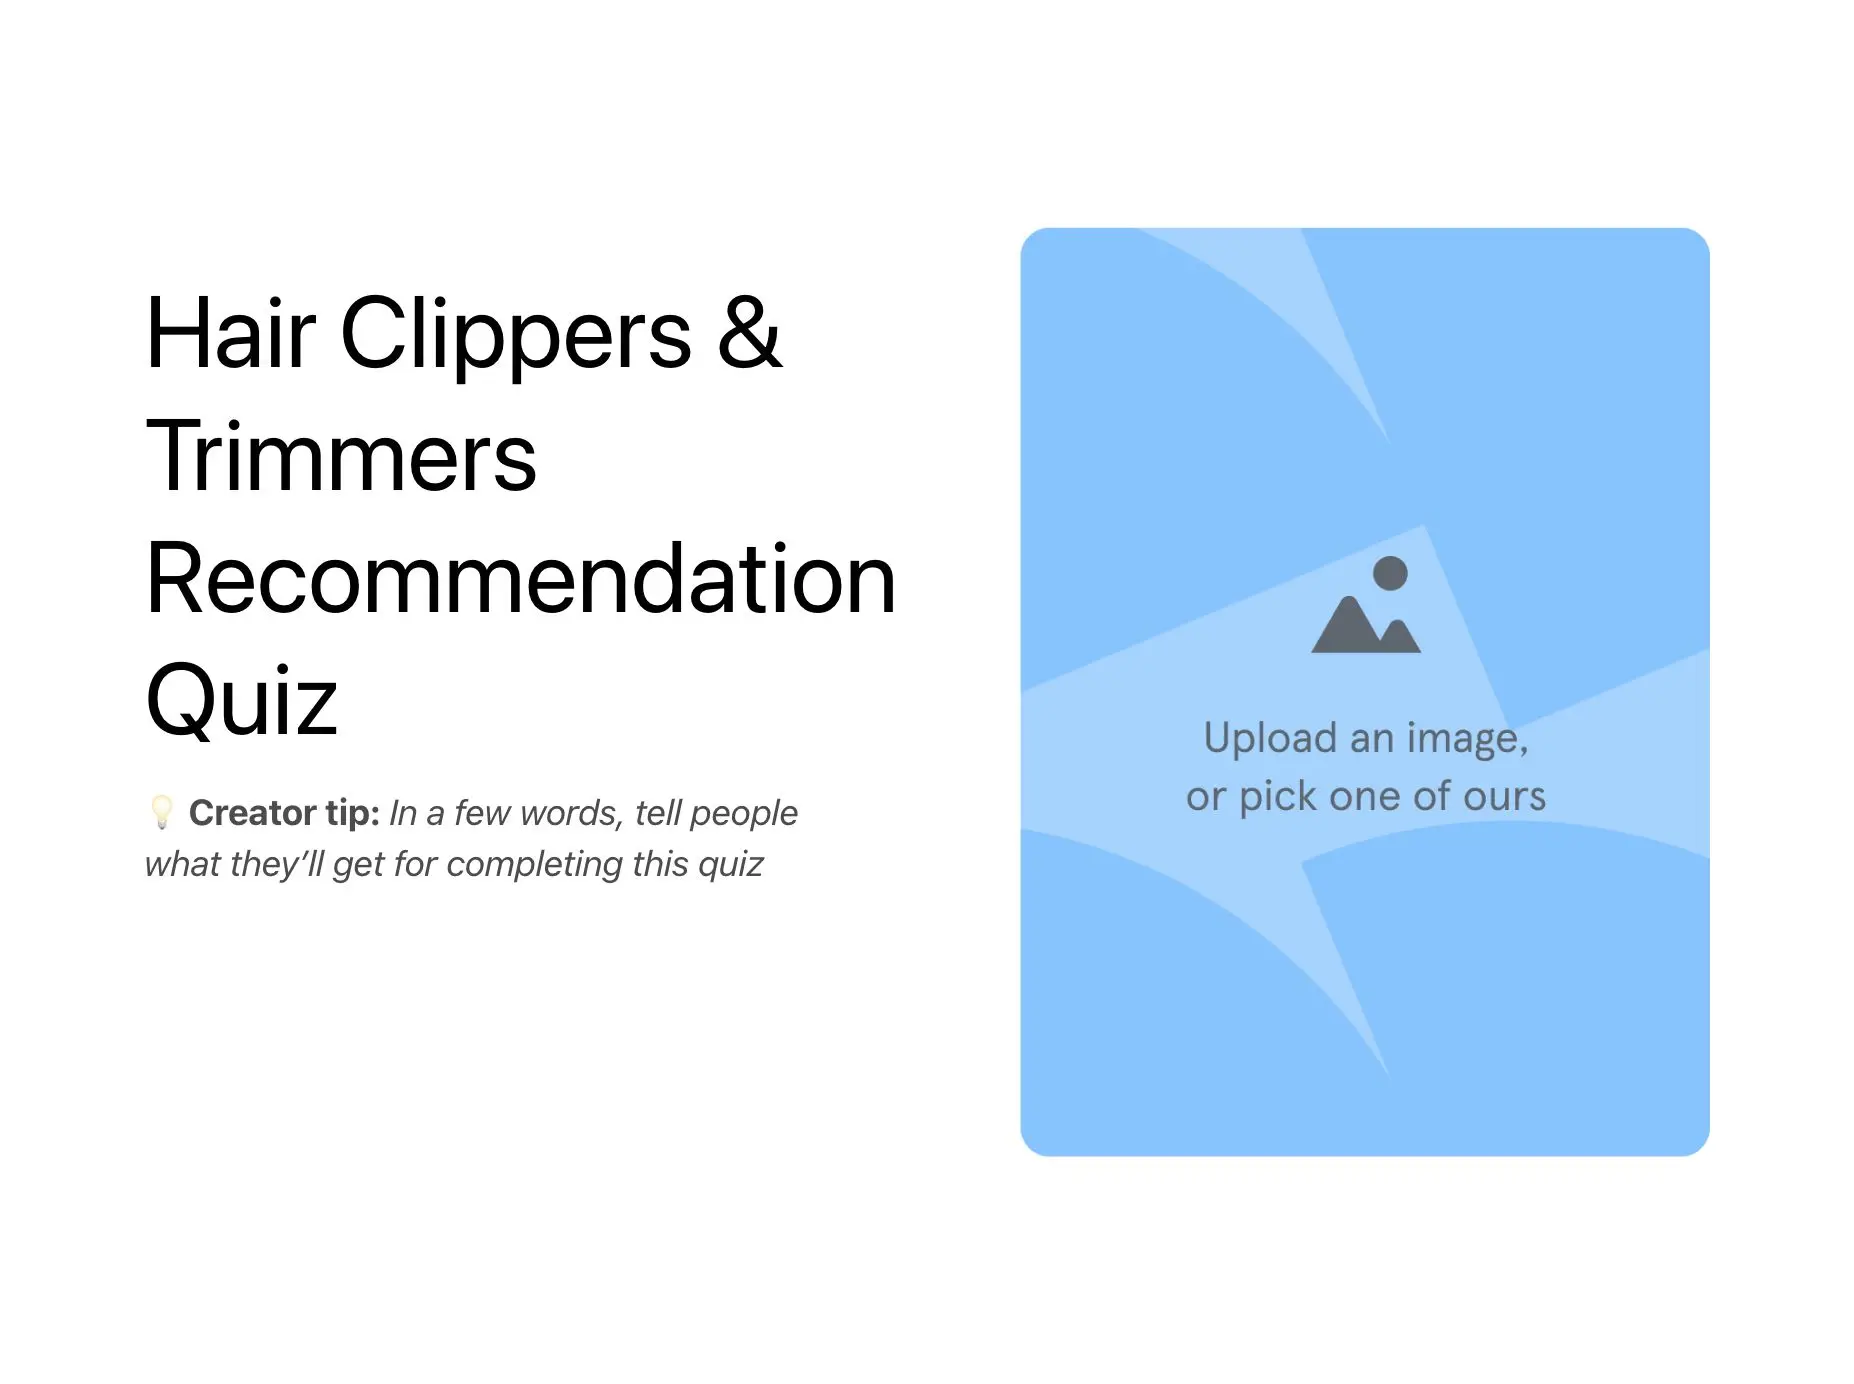 Hair Clippers & Trimmers Recommendation Quiz Template Hero